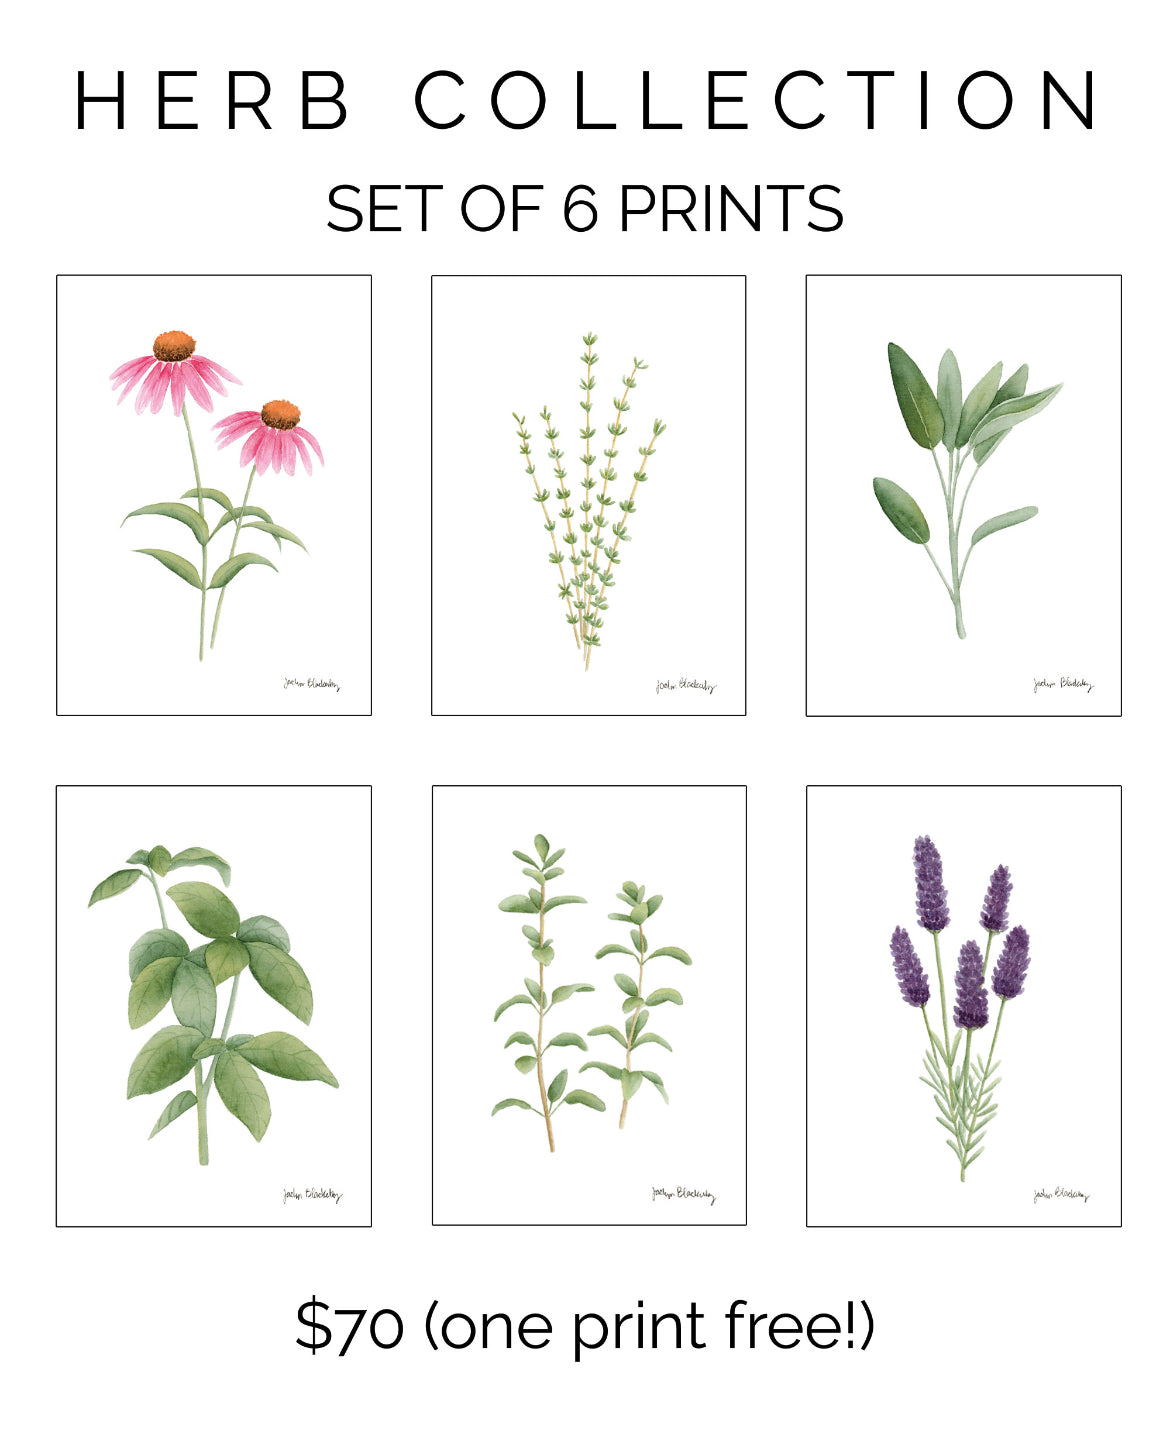 Herb Collection Print Set by Jaclyn Blackerby